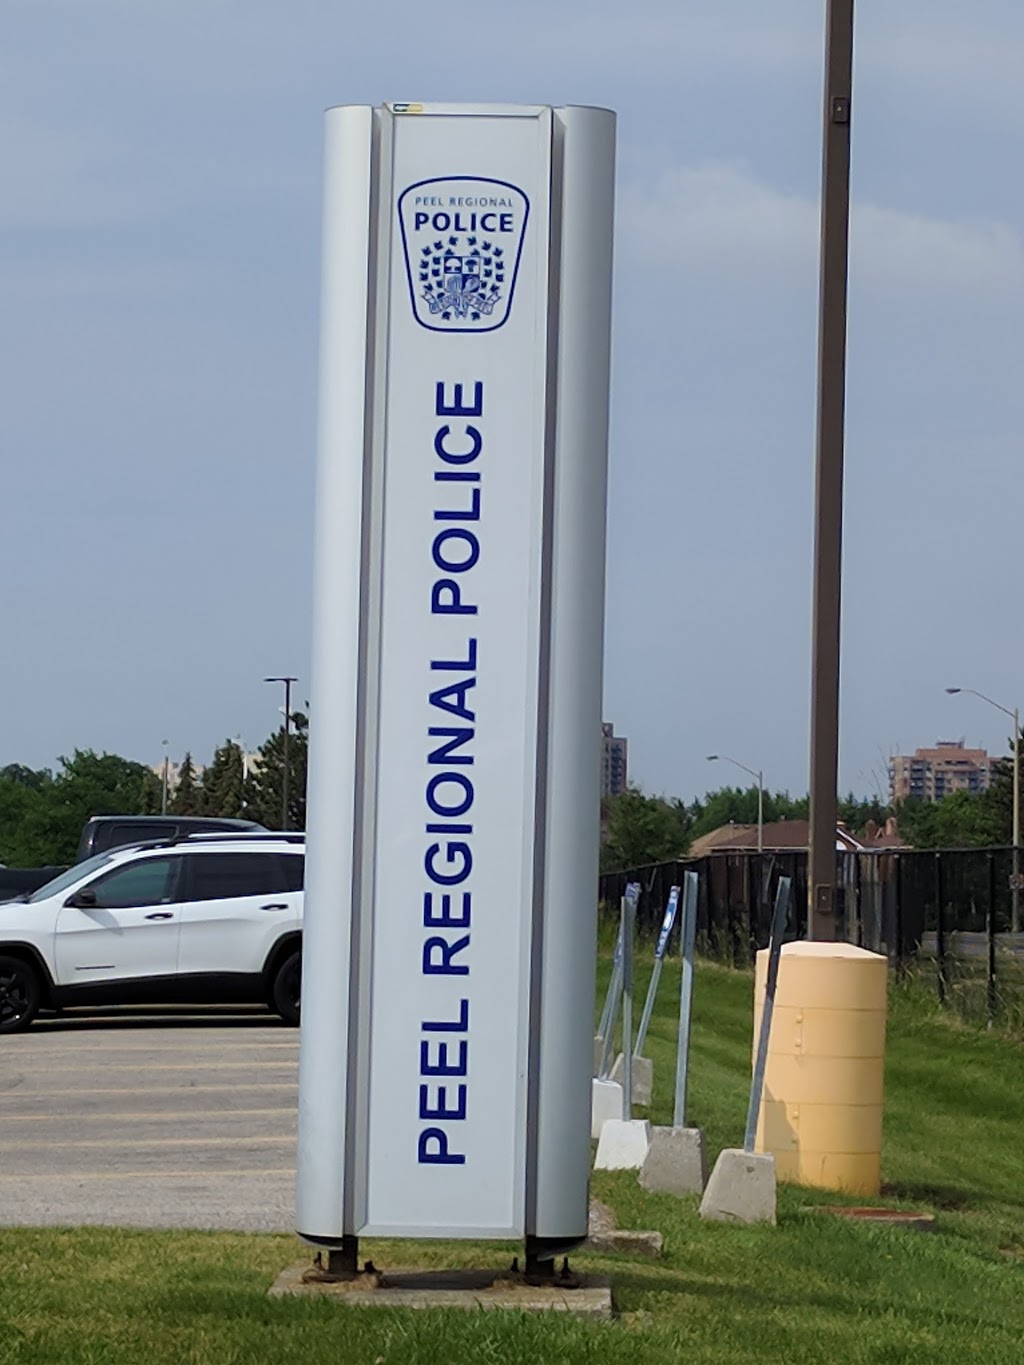 Peel Regional Police Headquarters | police | 7150 Mississauga Rd, Mississauga, ON L5N 8M5, Canada | 90545333114050 OR +1 905-453-3311 ext. 4050